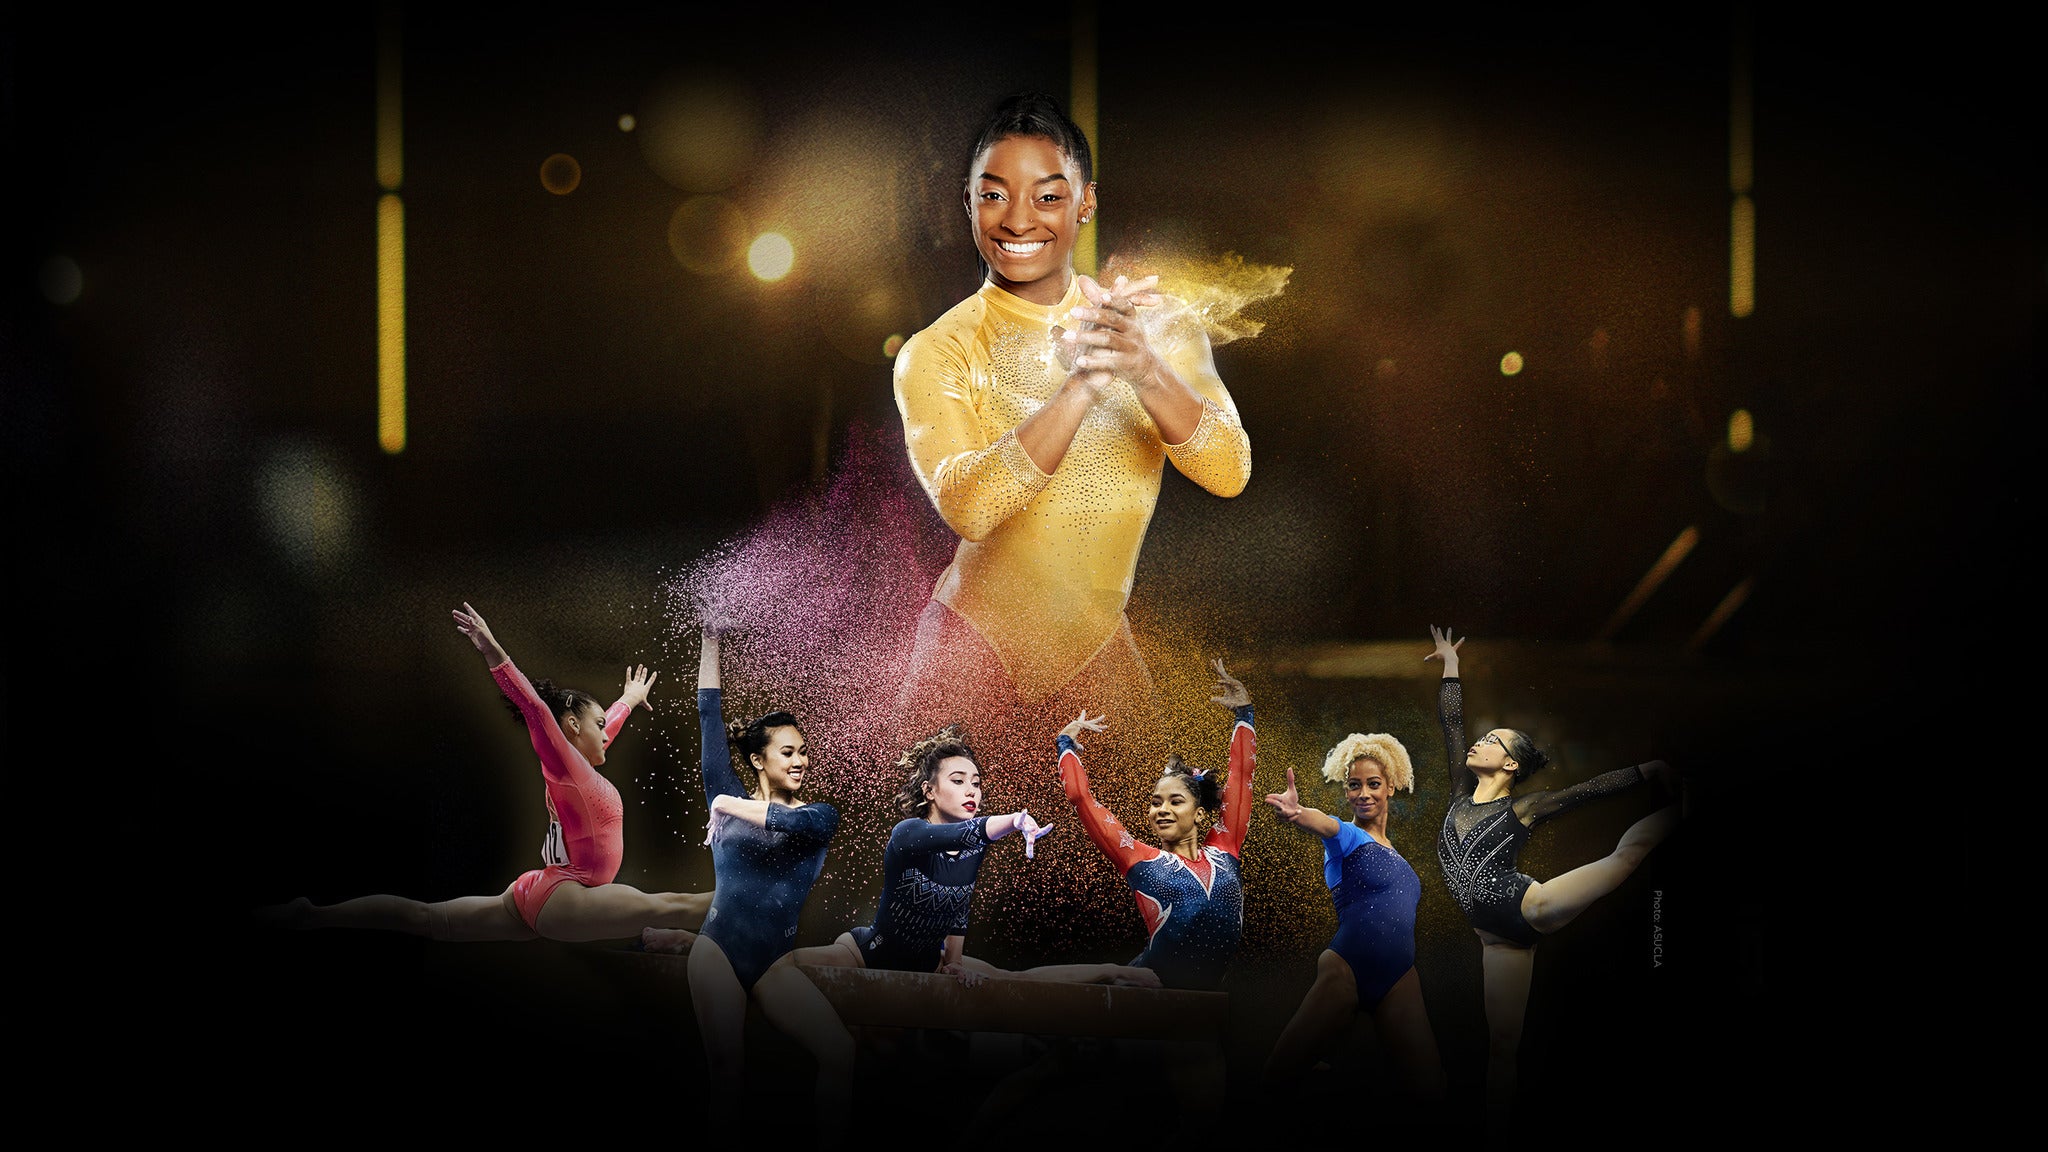 G.O.A.T. Gold Over America Tour Starring Simone Biles in San Jose promo photo for VIP Package presale offer code